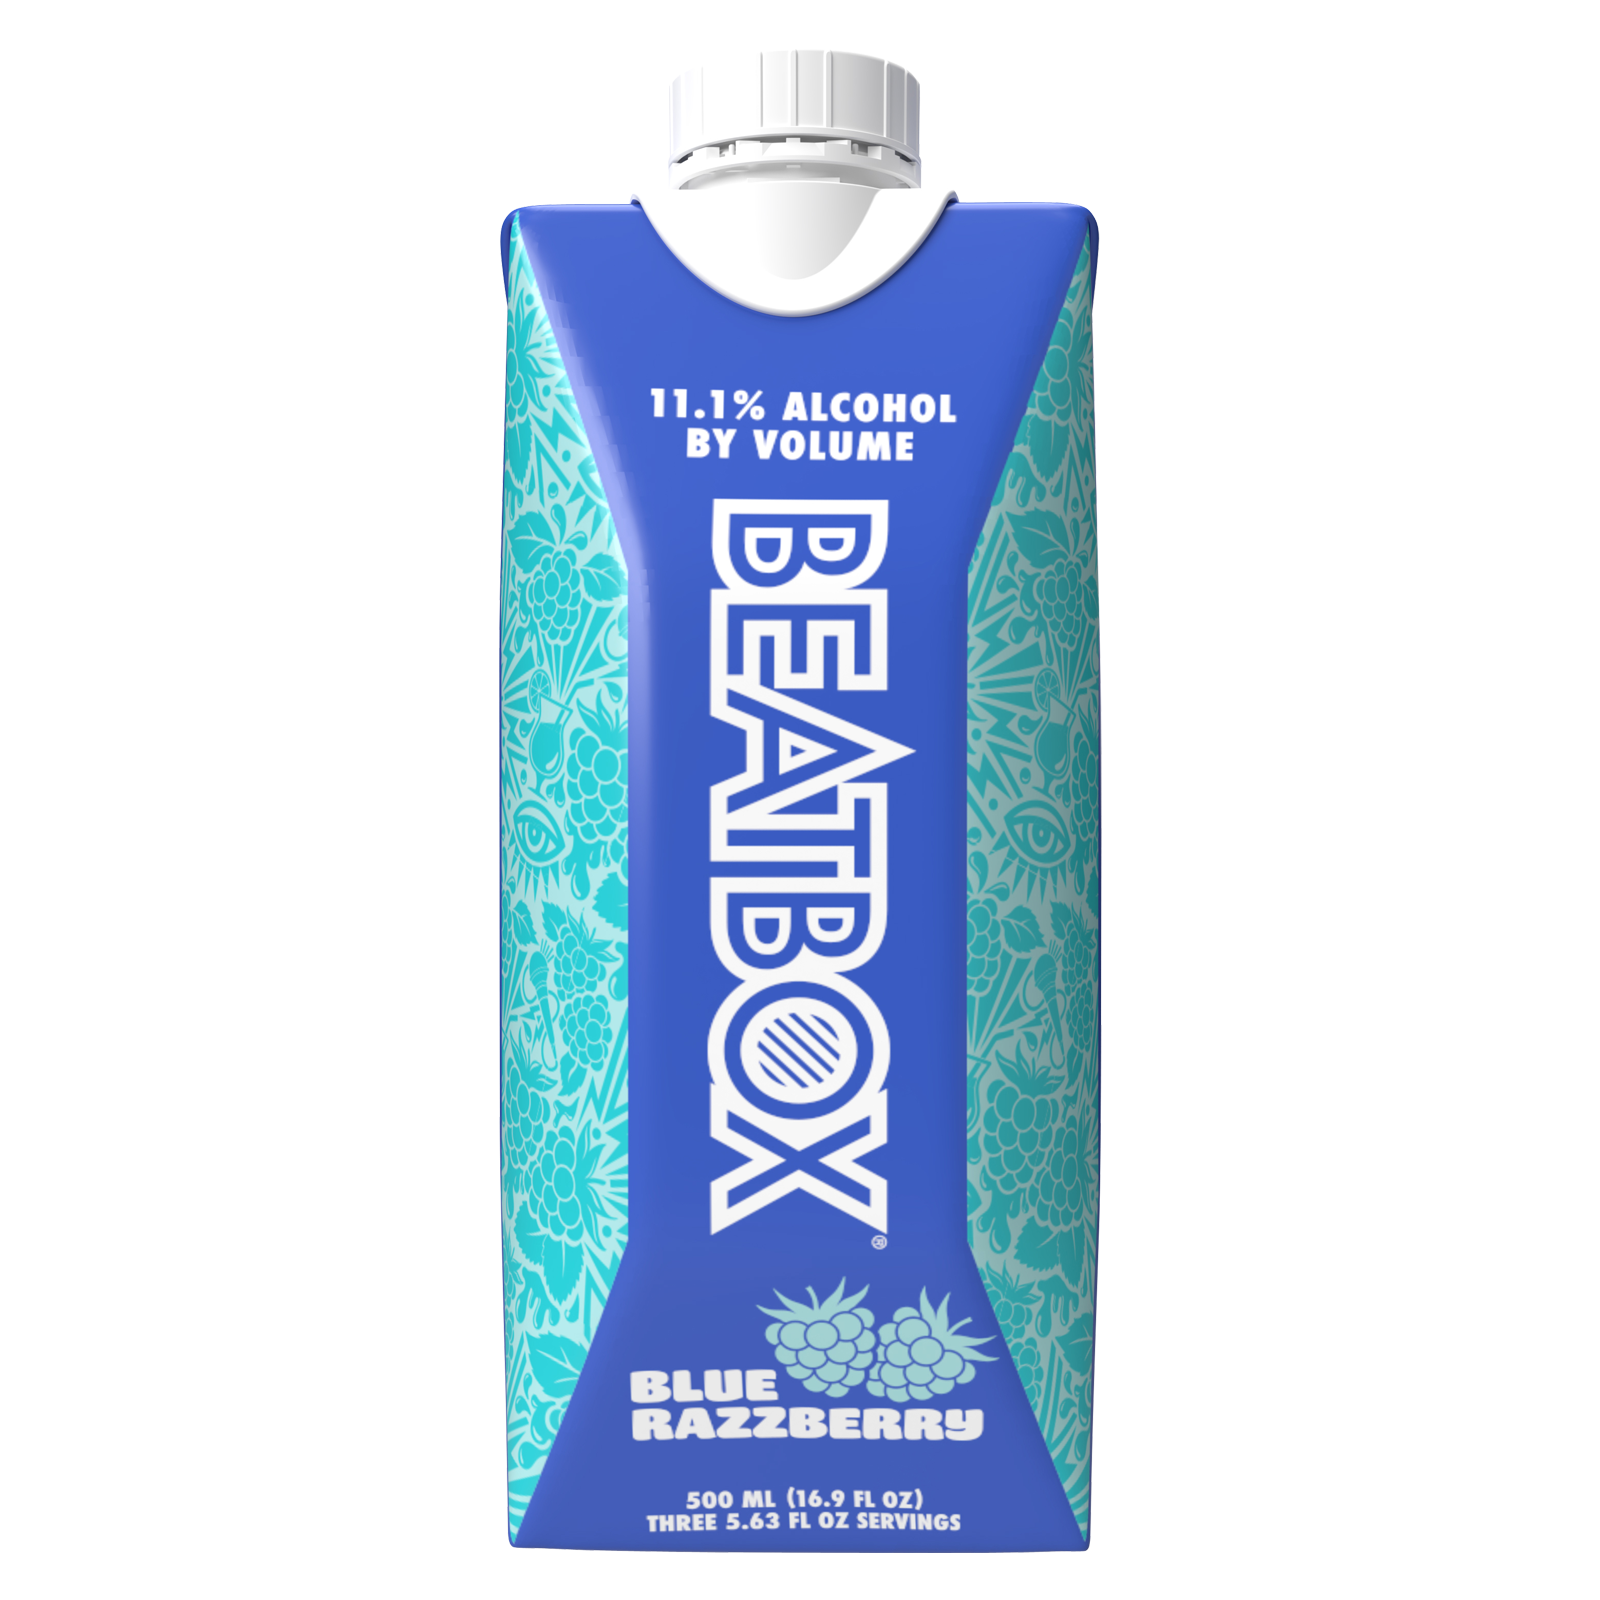 BeatBox Blue Razzberry 500ml 11.1% ABV Party Punch